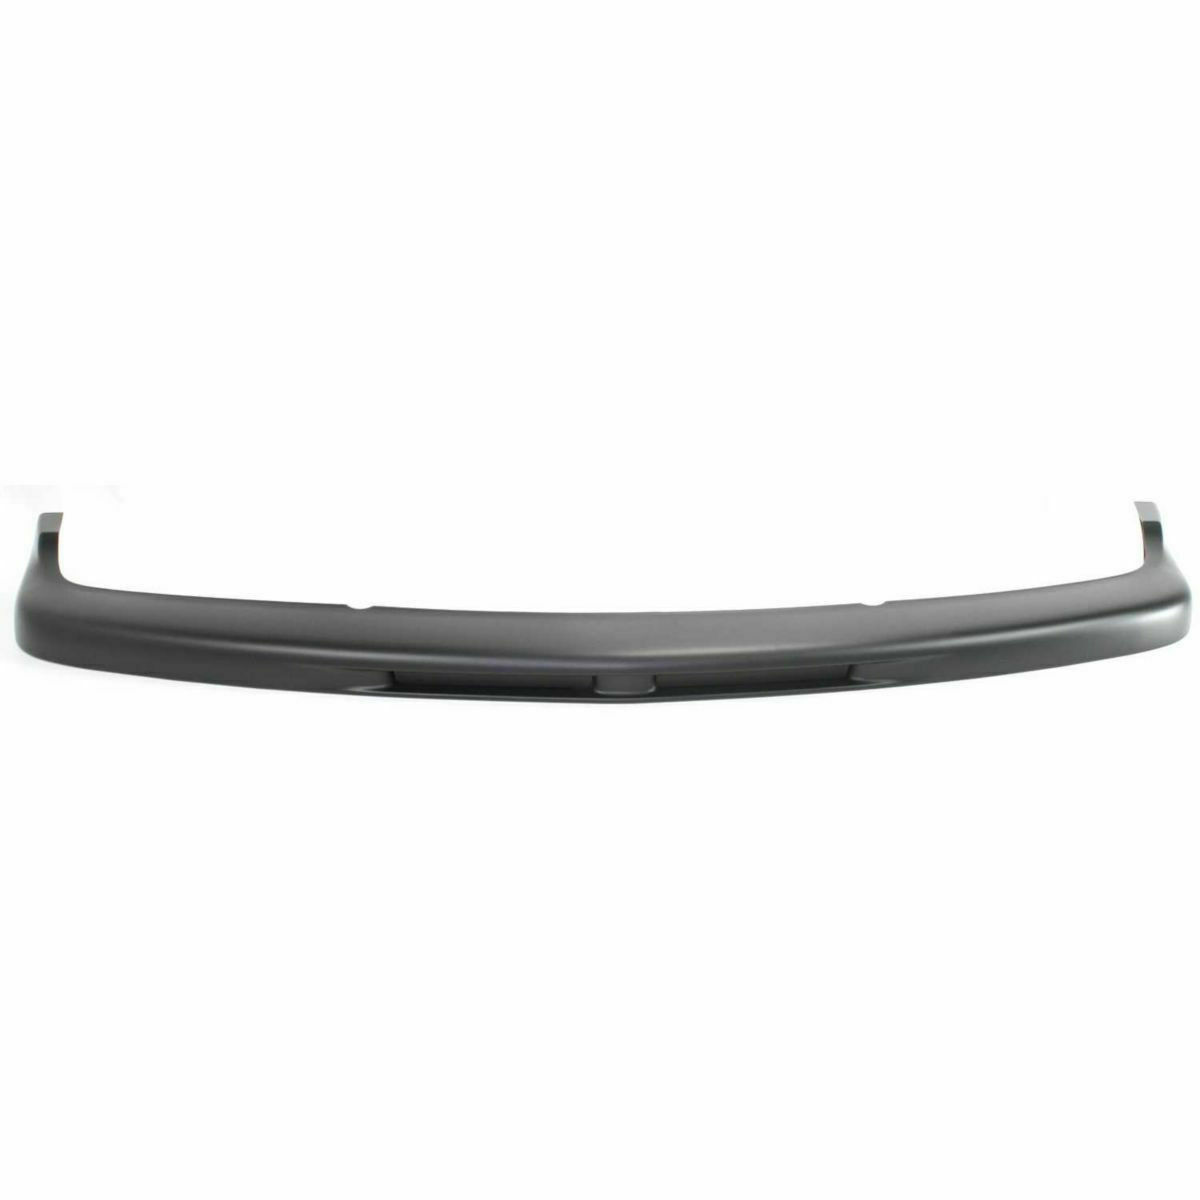 2004-2005 Chevy Tahoe Suburban Silverado Upper Bumper Painted to Match